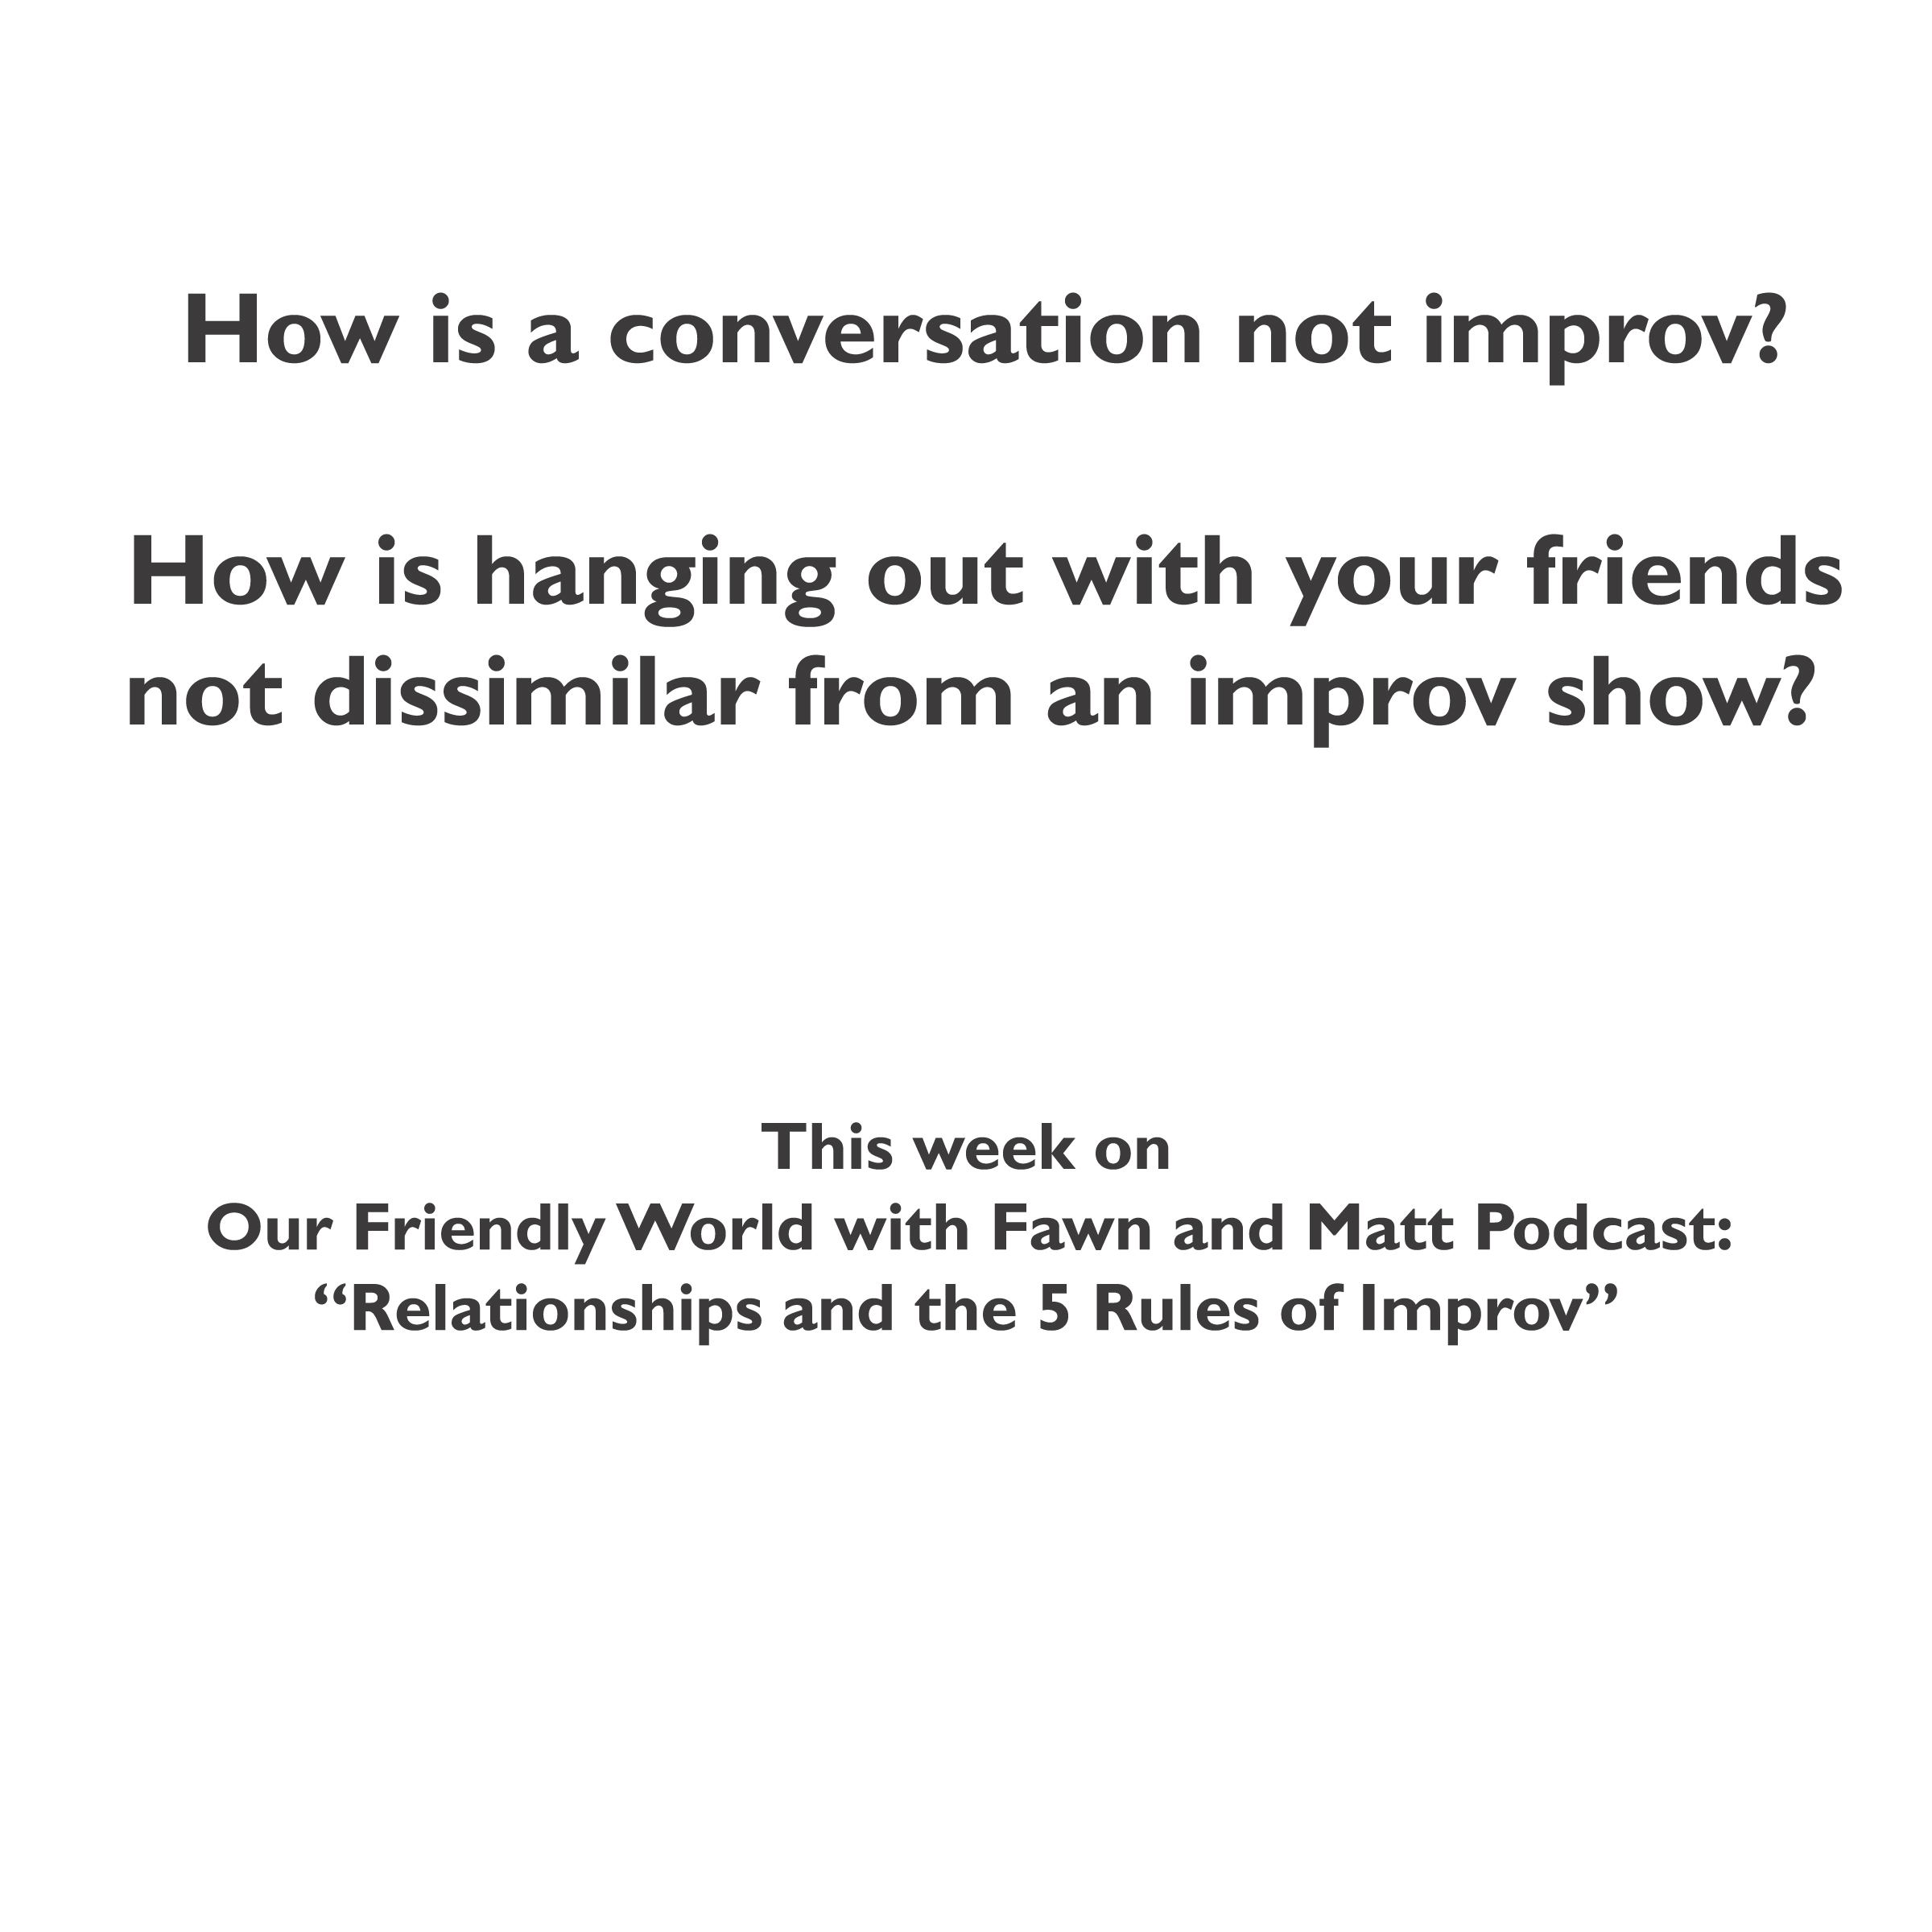 Relationships and the 5 Rules of Improv